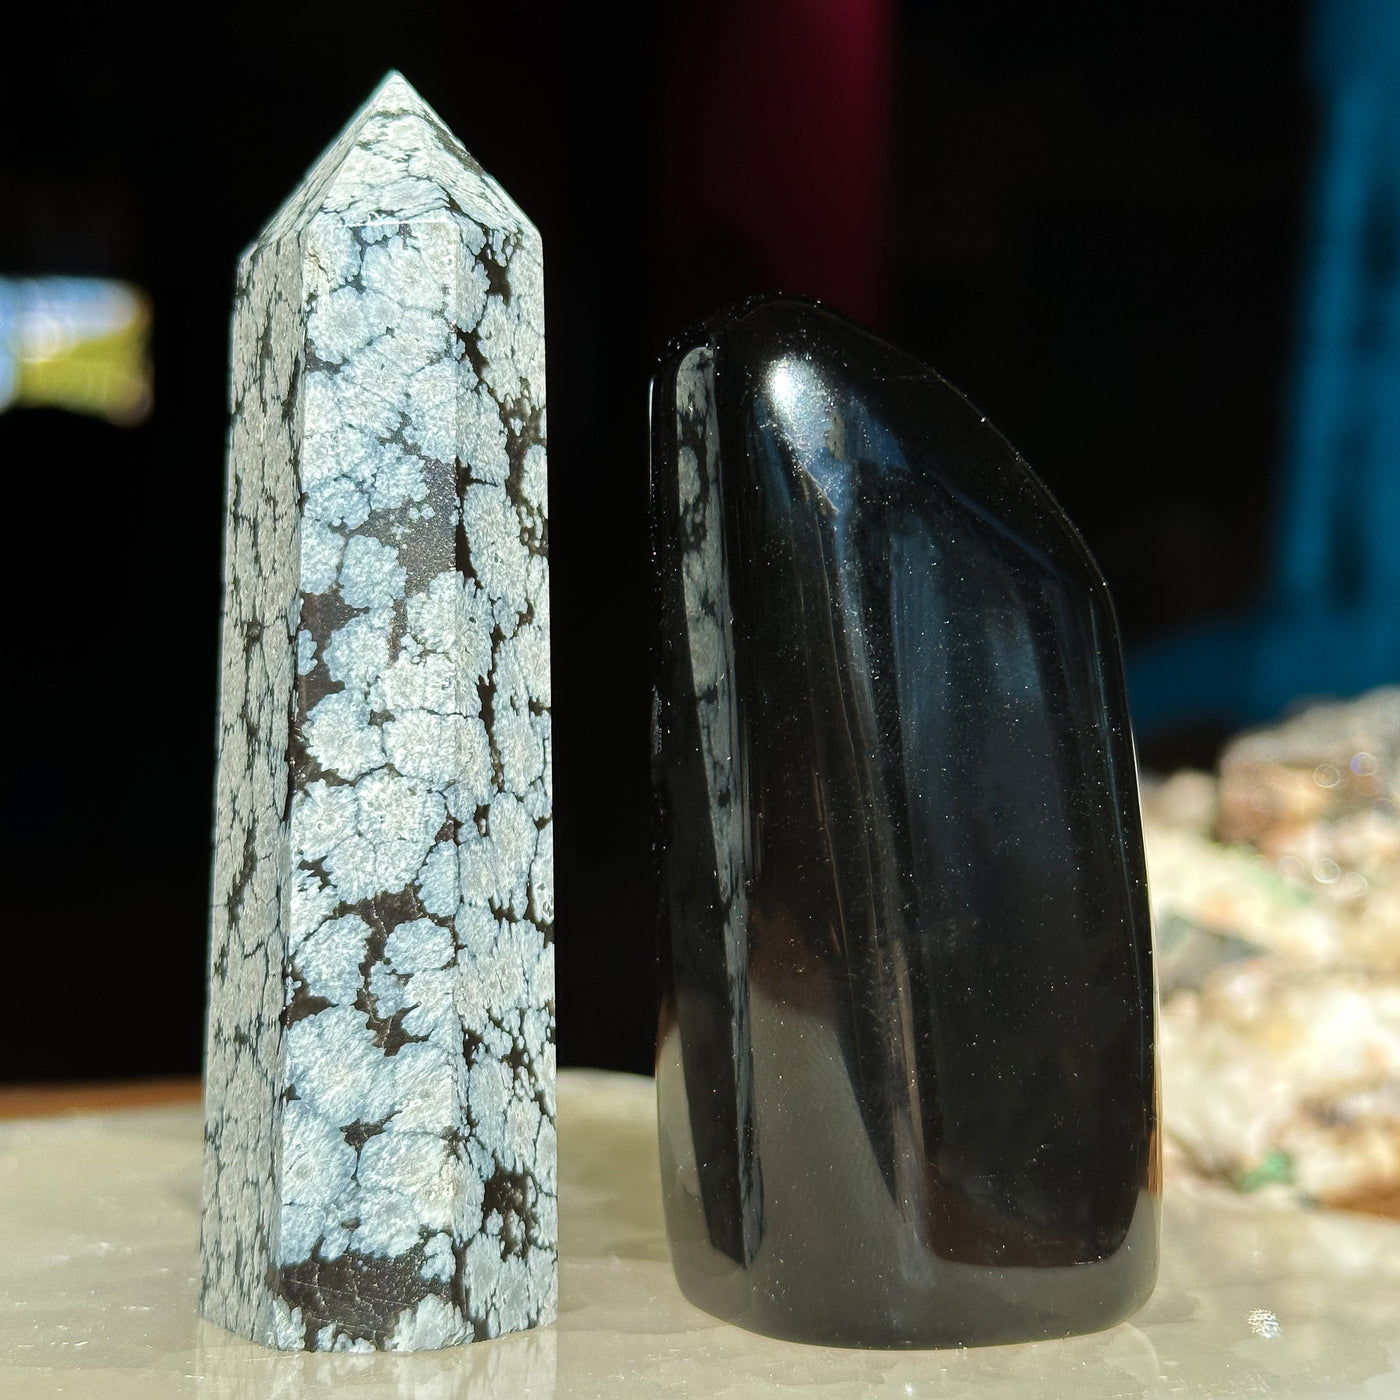 View of both Snowflake Obsidian and Black Obsidian freeform by Energy Muse 